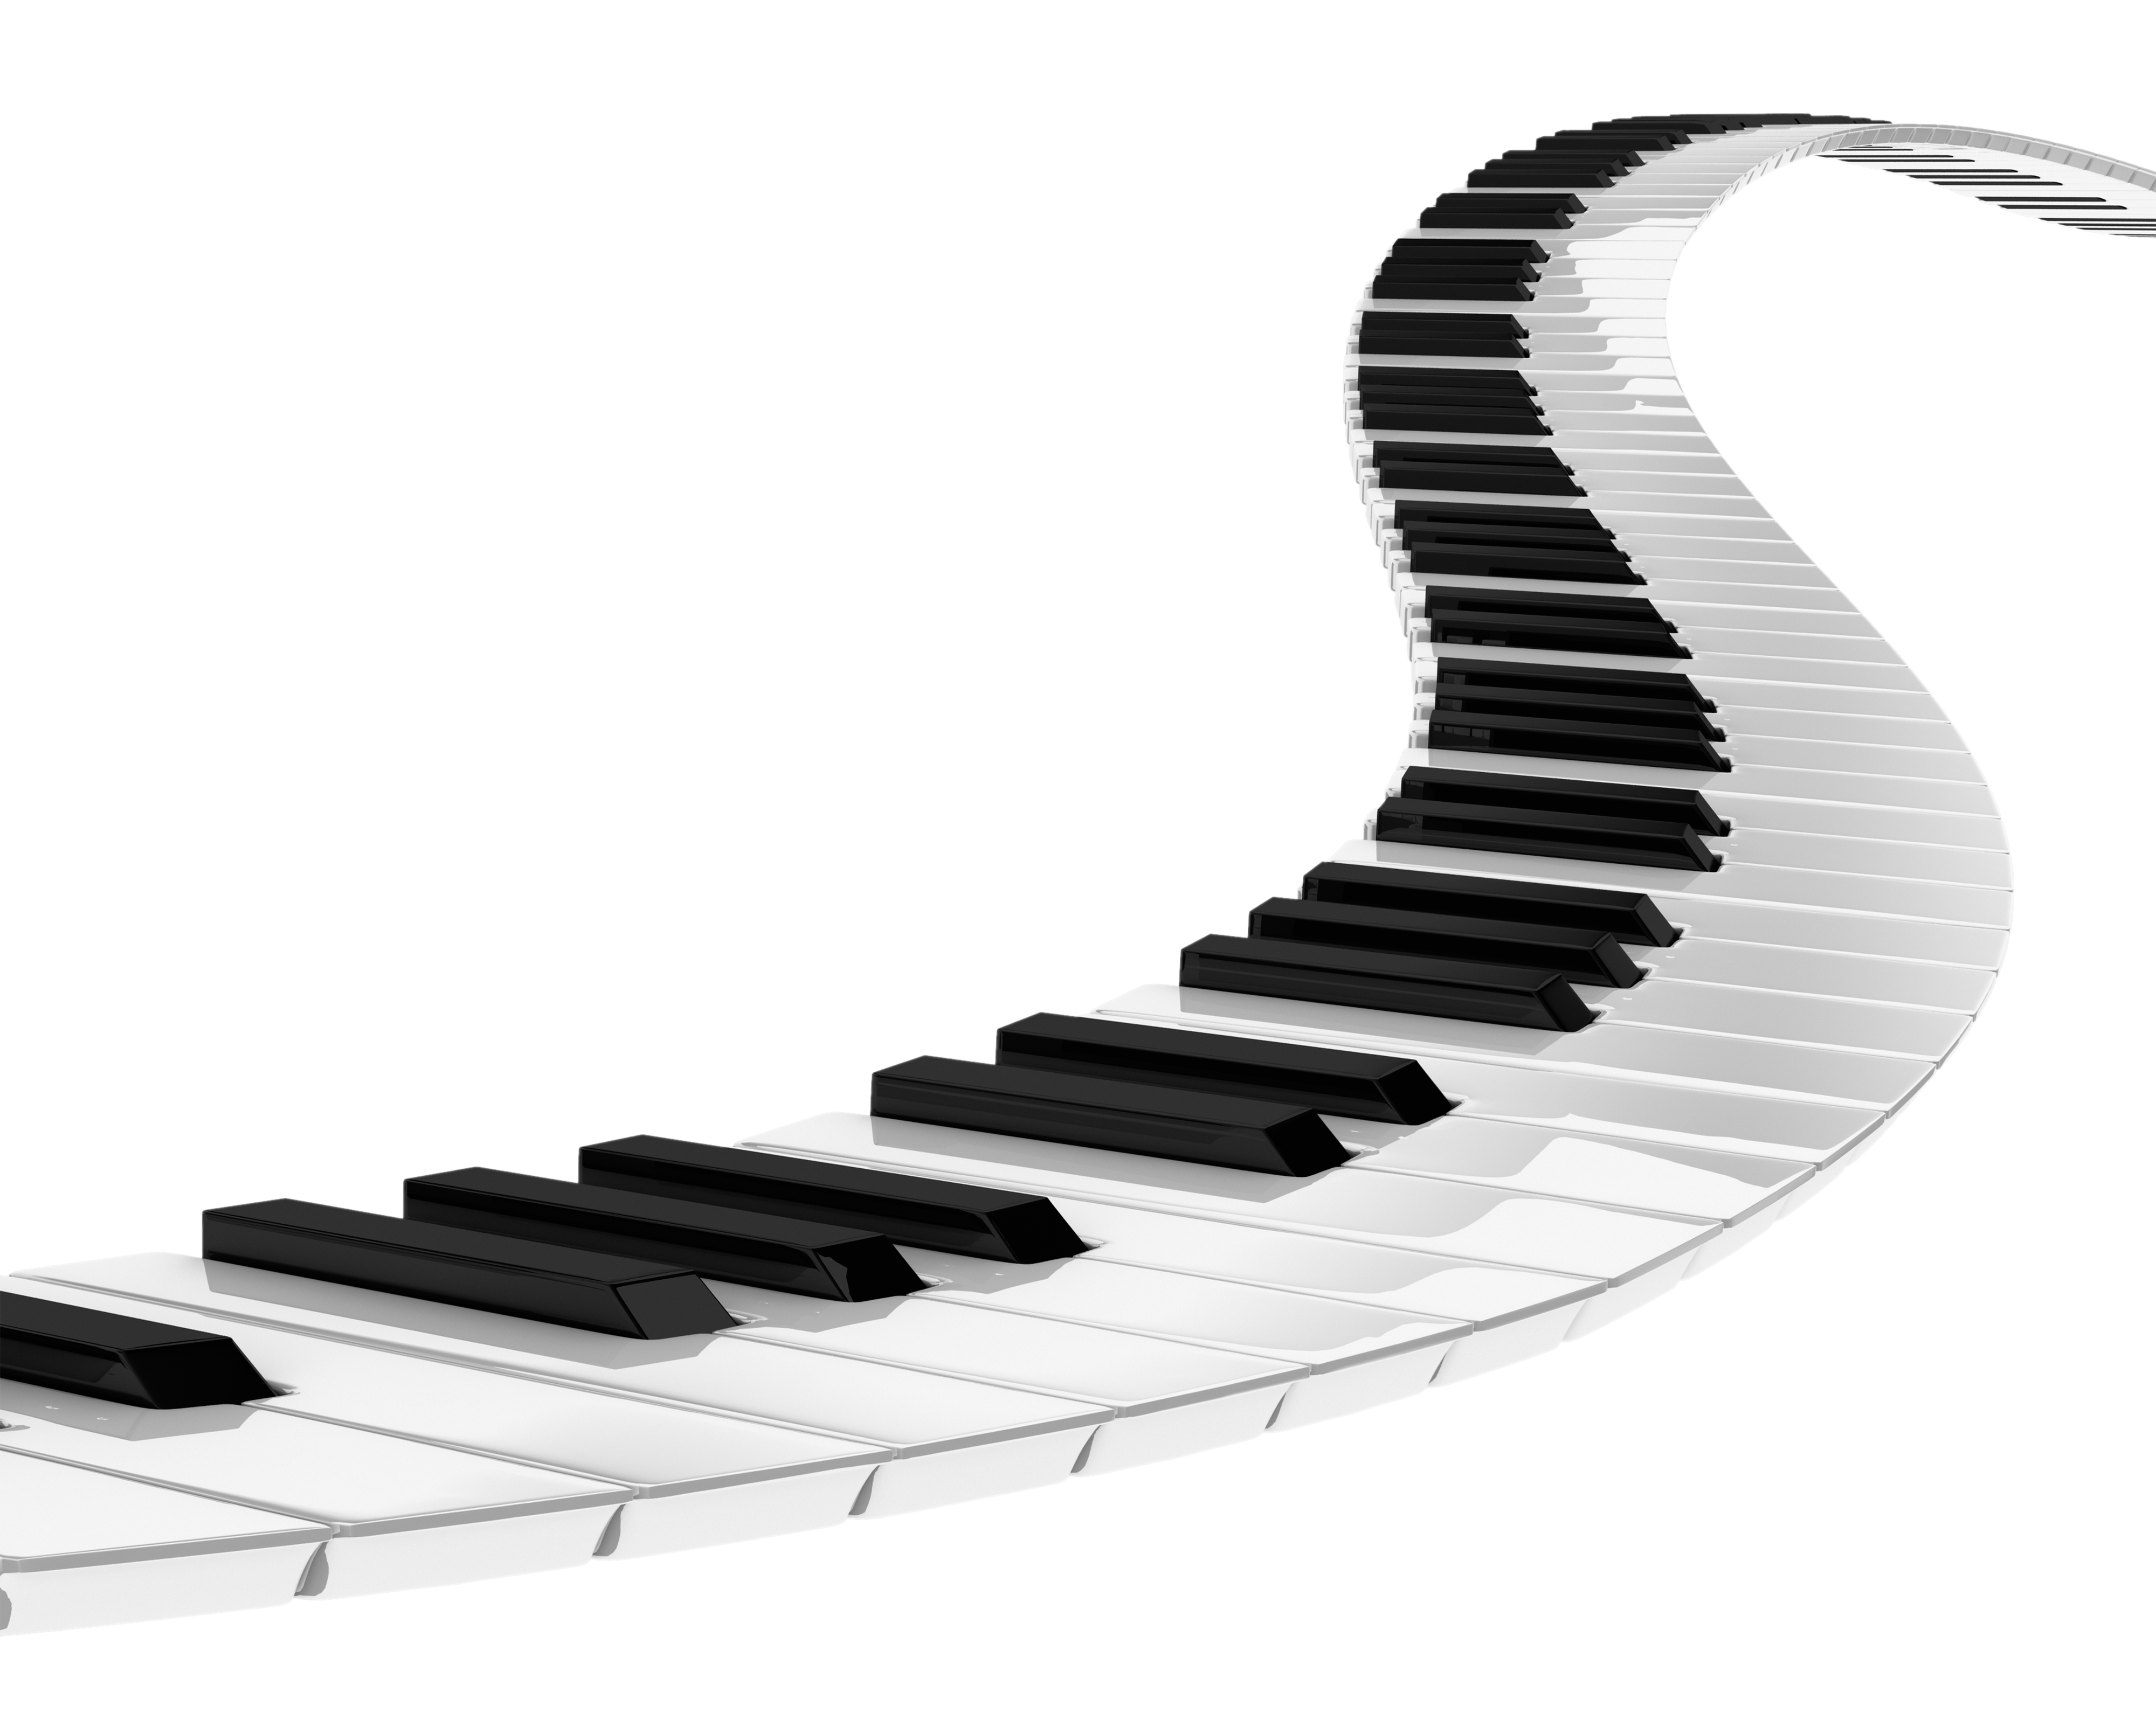 Music Keyboard Png Hd - Piano Free Png Image Png Image, Transparent background PNG HD thumbnail